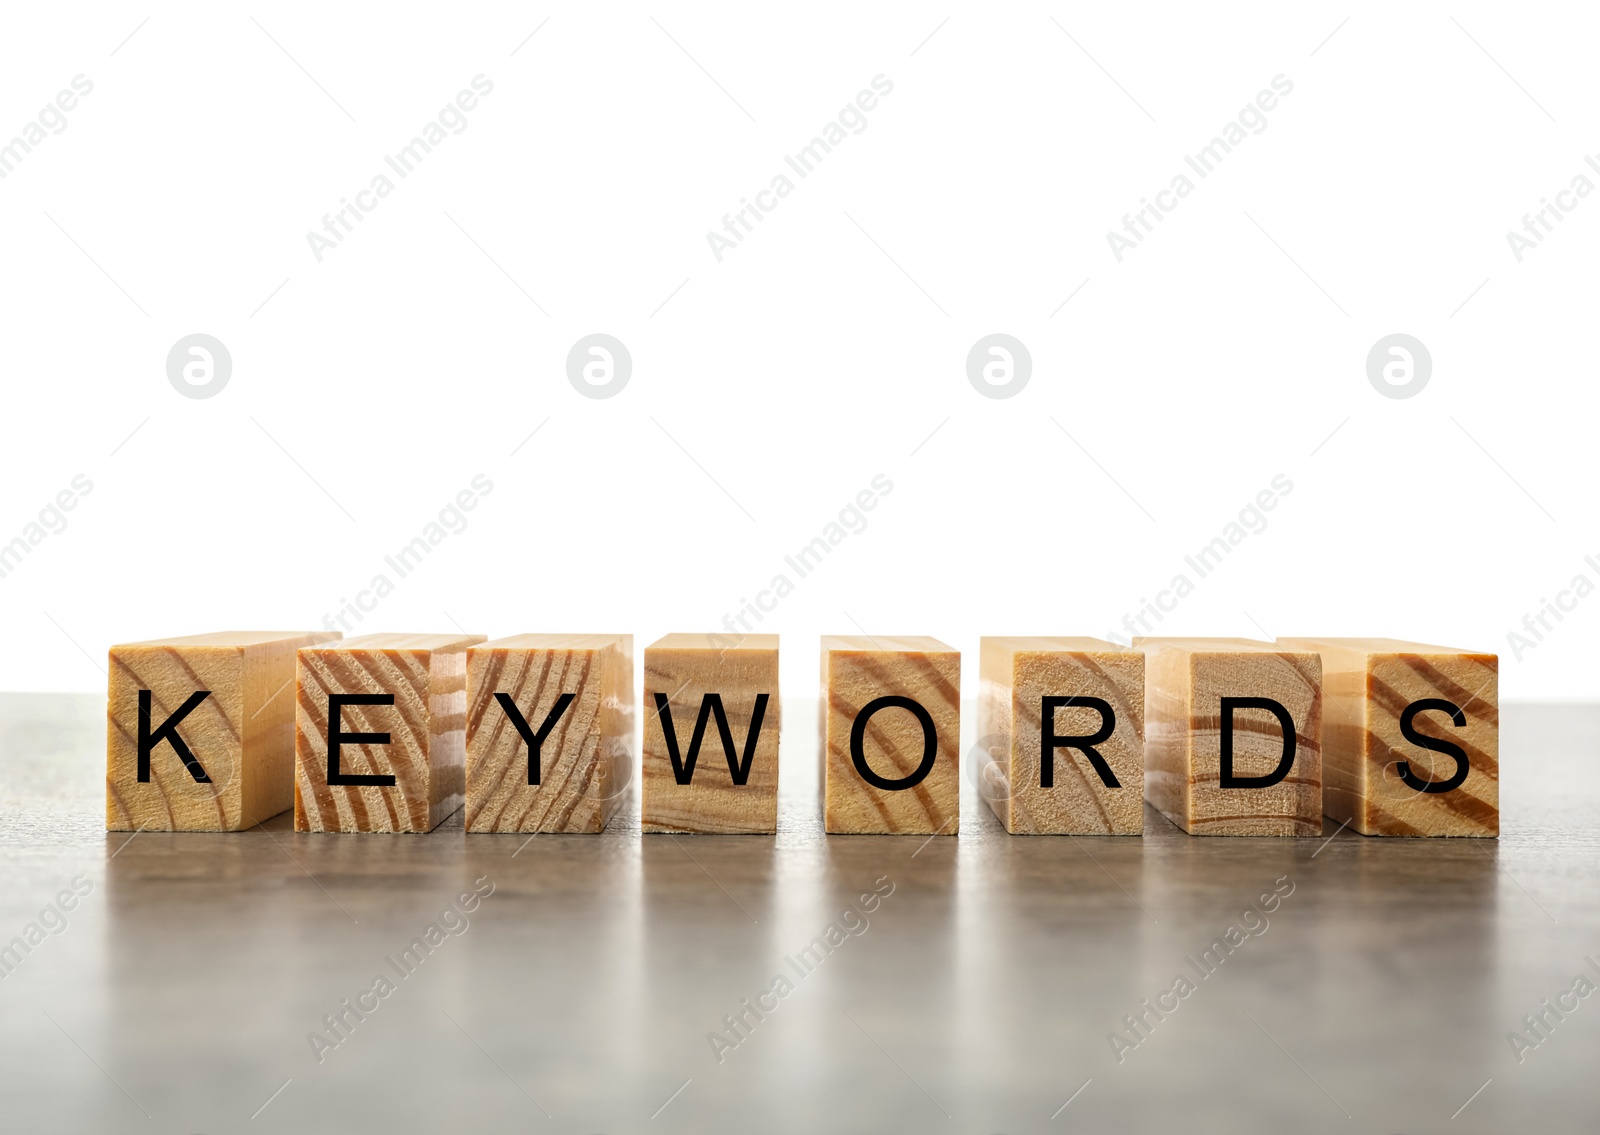 Photo of Word KEYWORDS made of wooden blocks on light grey table